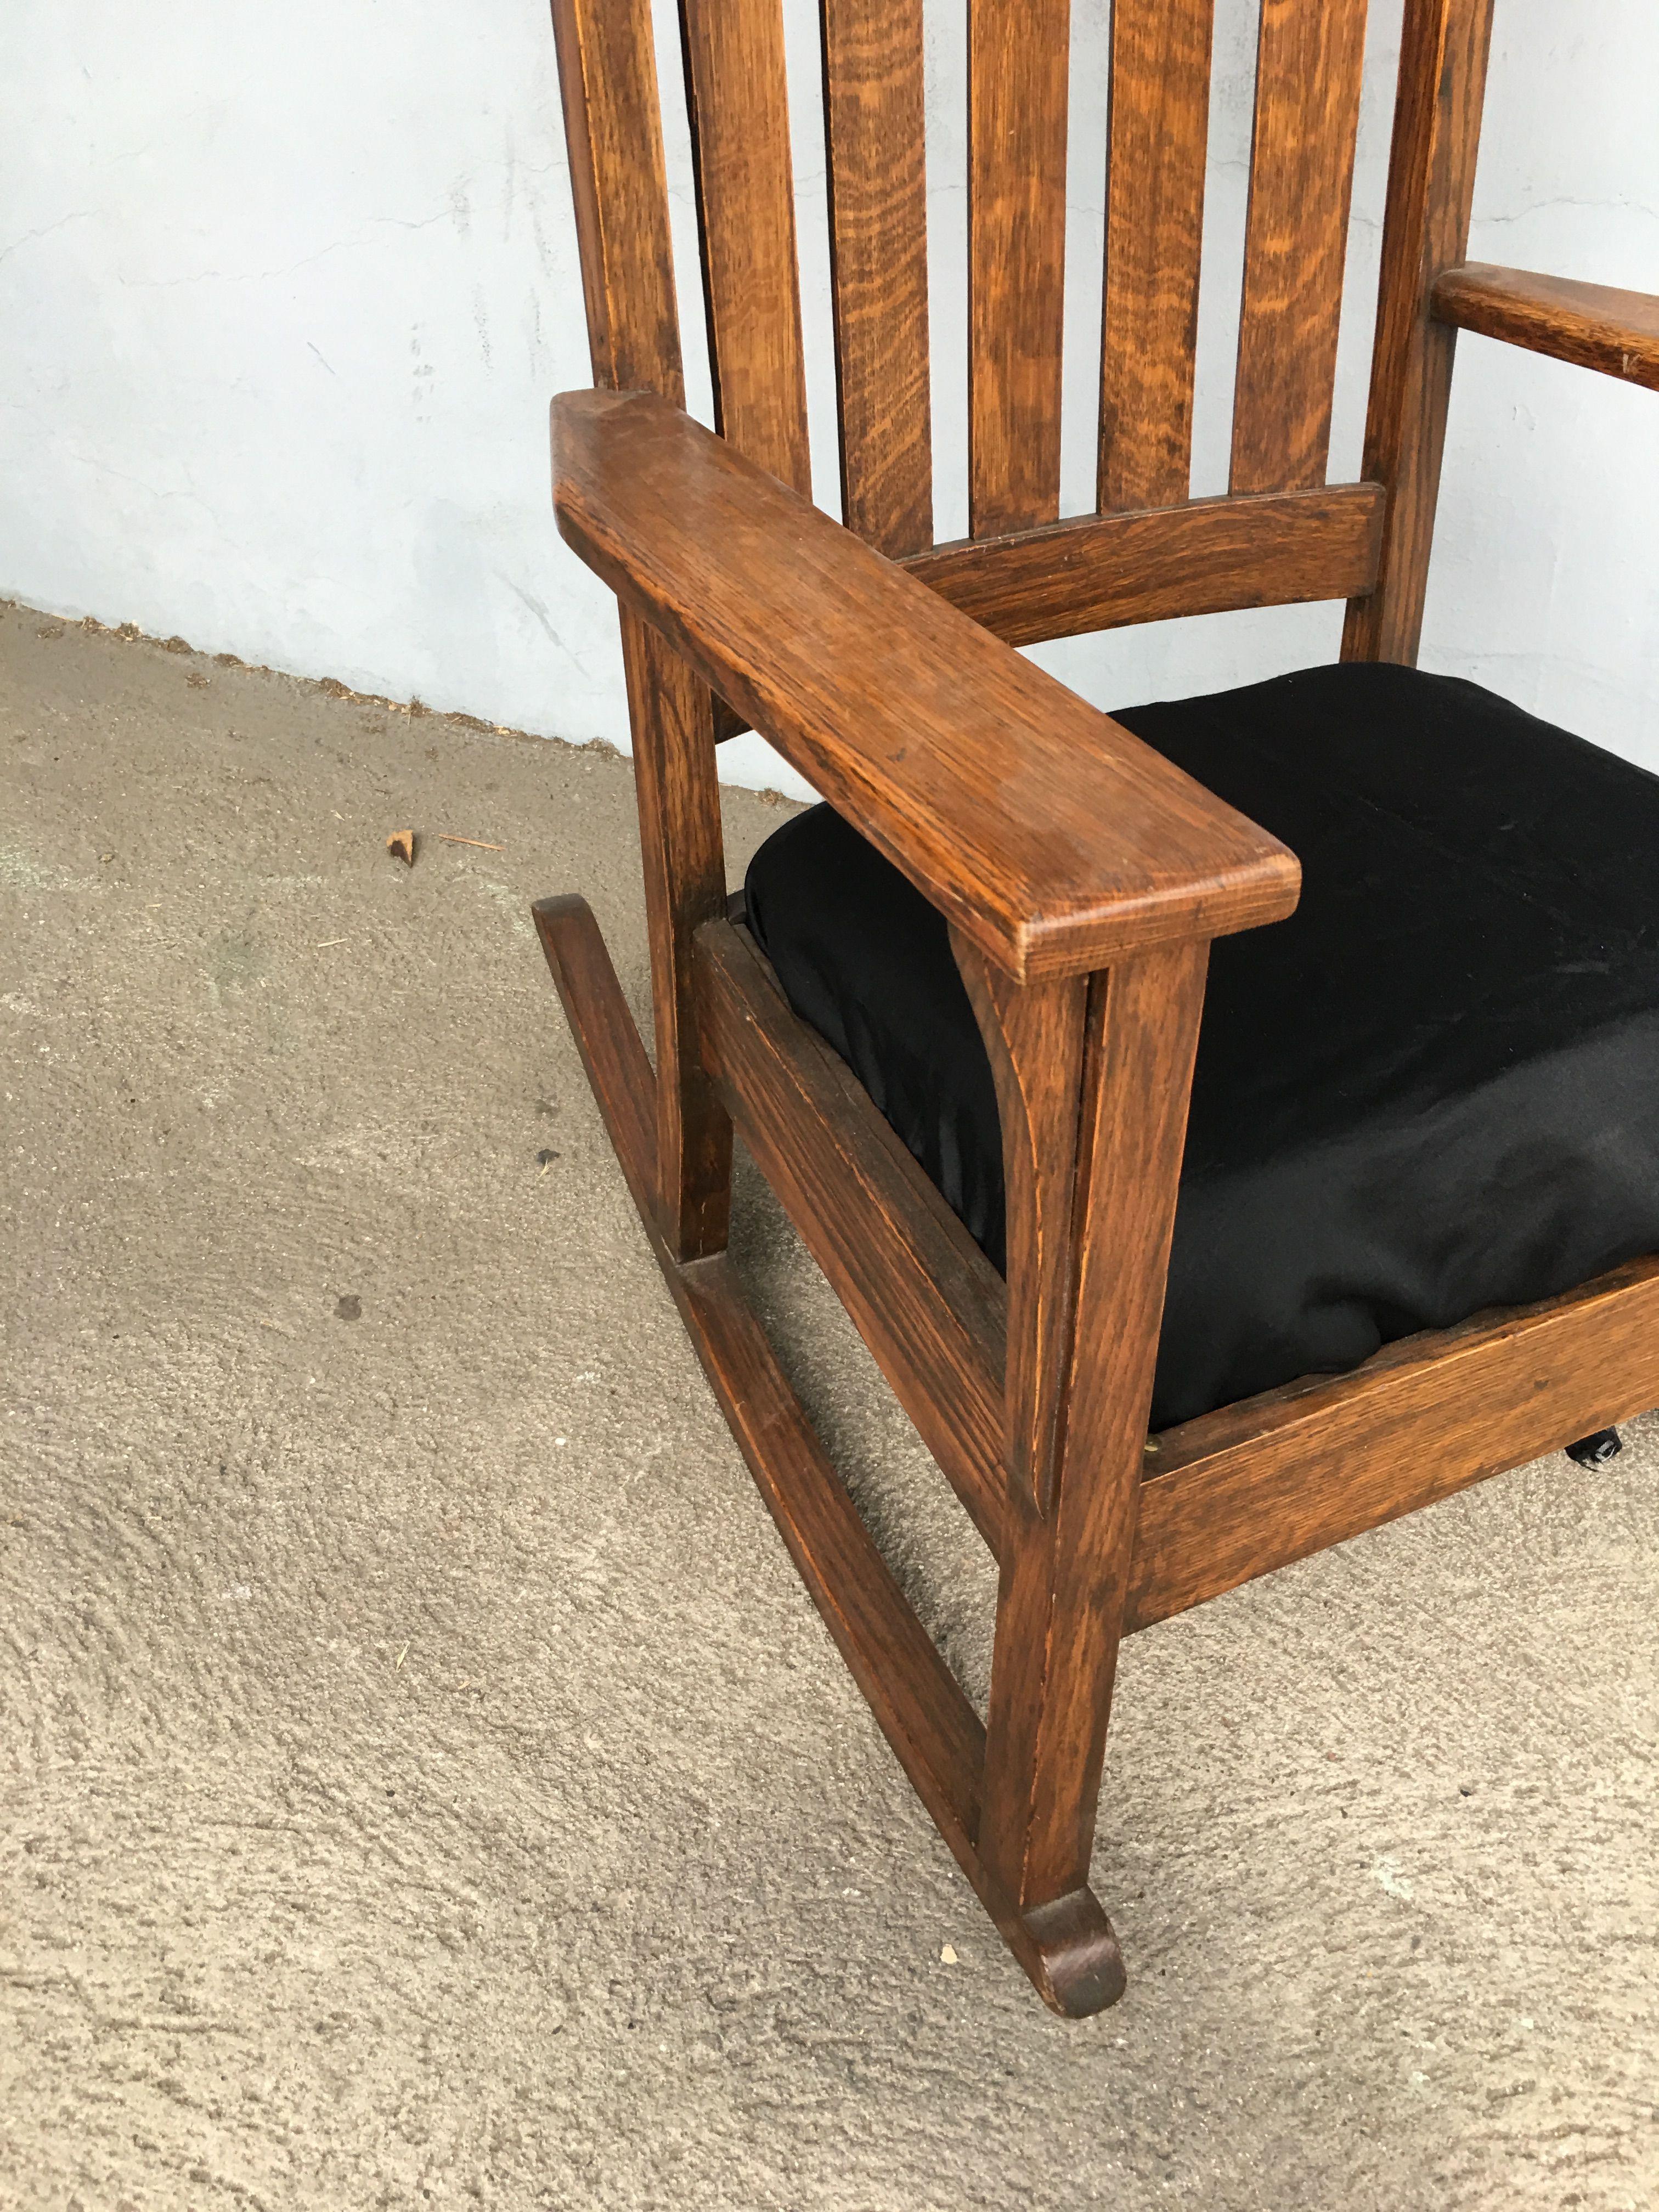 Mission Chestnut Slat Back Rocking Chair by National Chair Co. In Excellent Condition For Sale In Van Nuys, CA